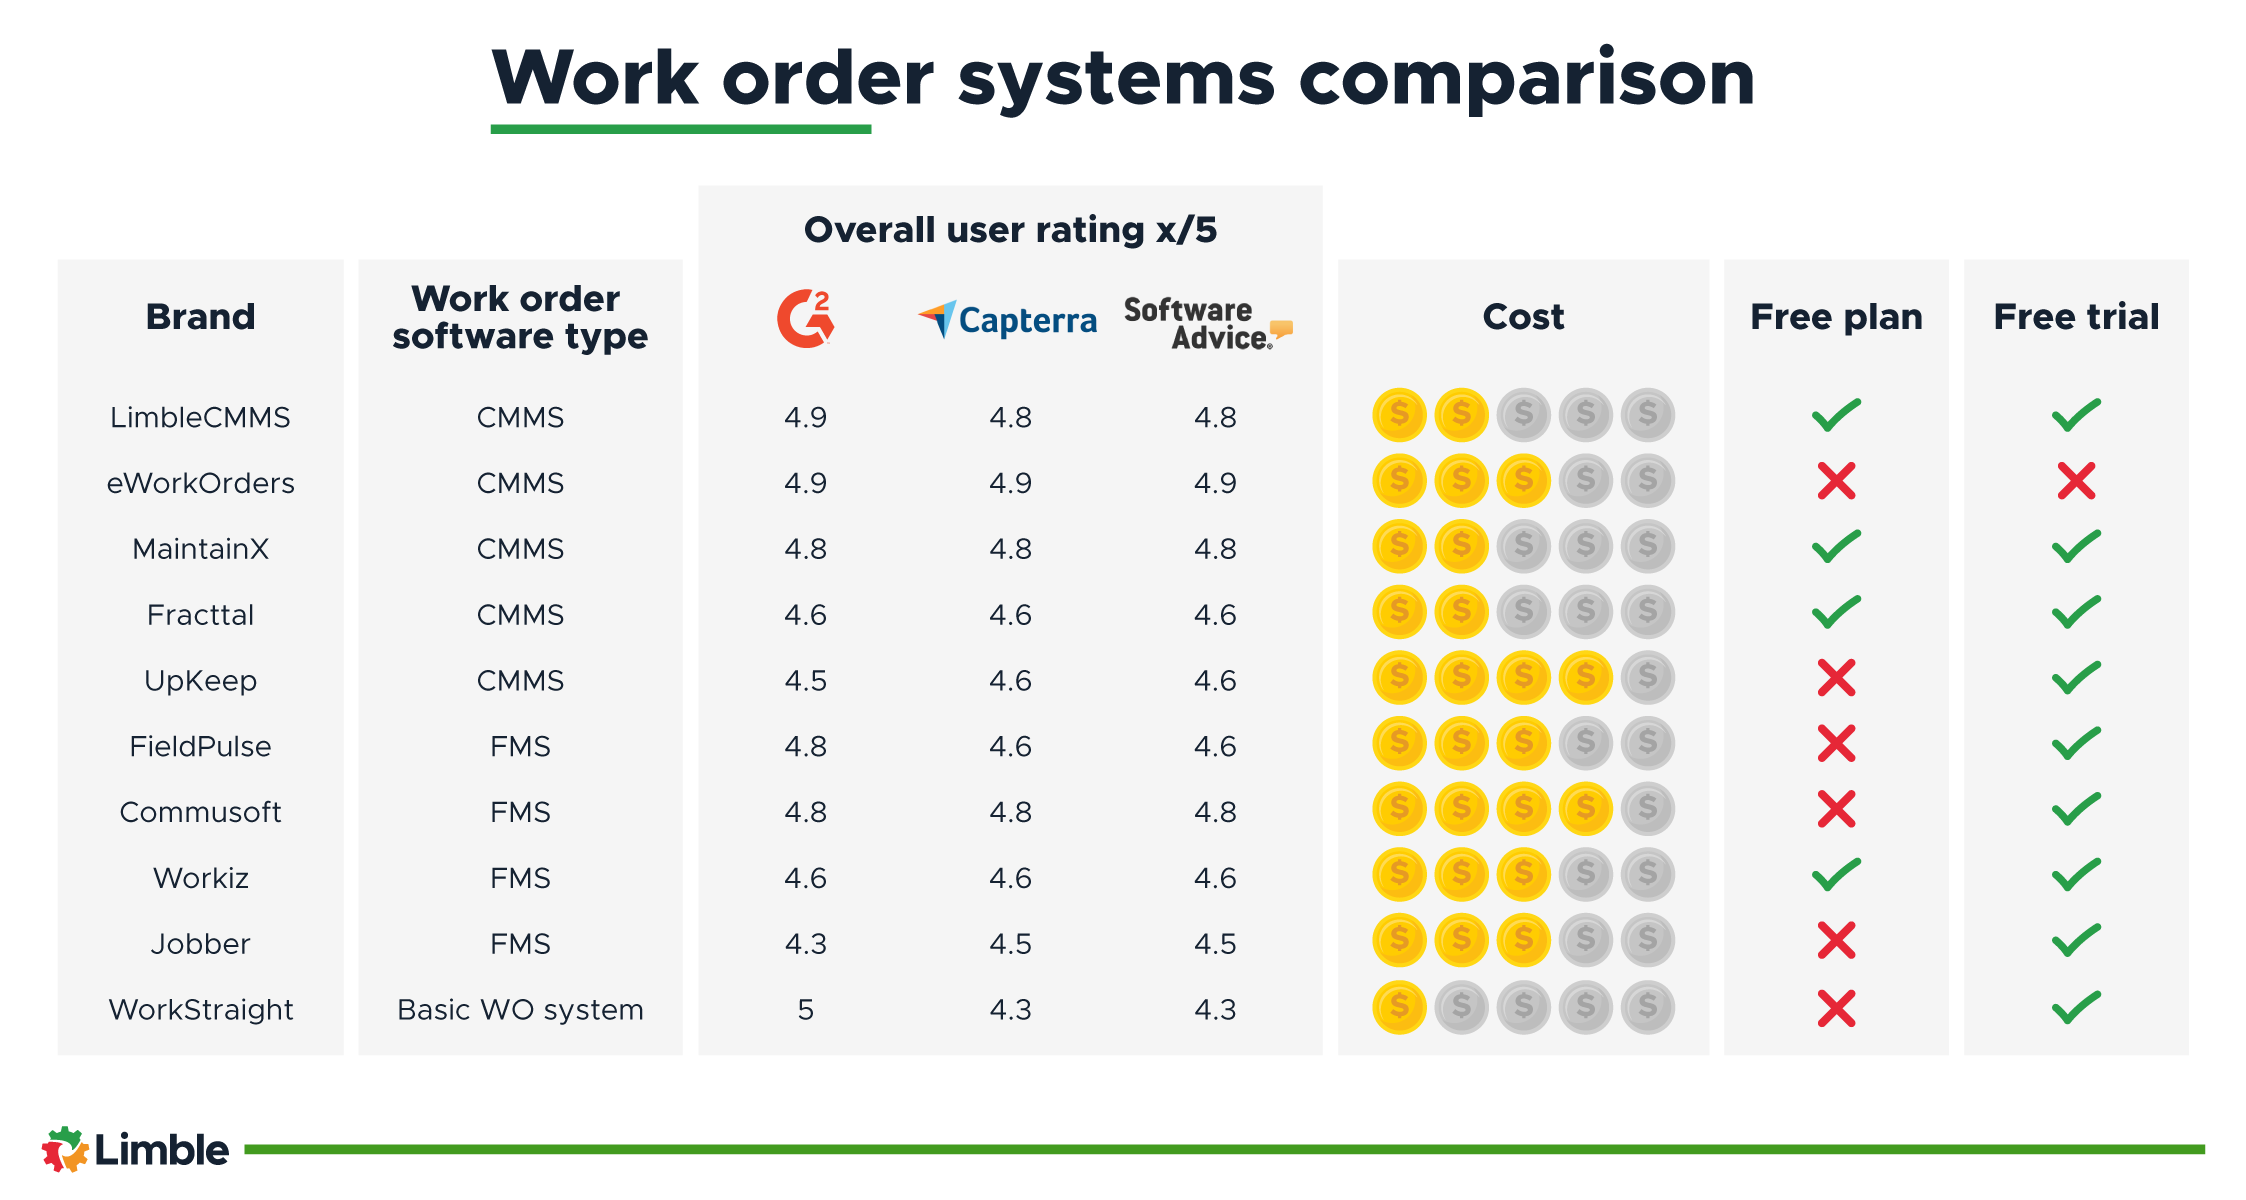 A table comparing work order systems by user review scores, cost, and more.